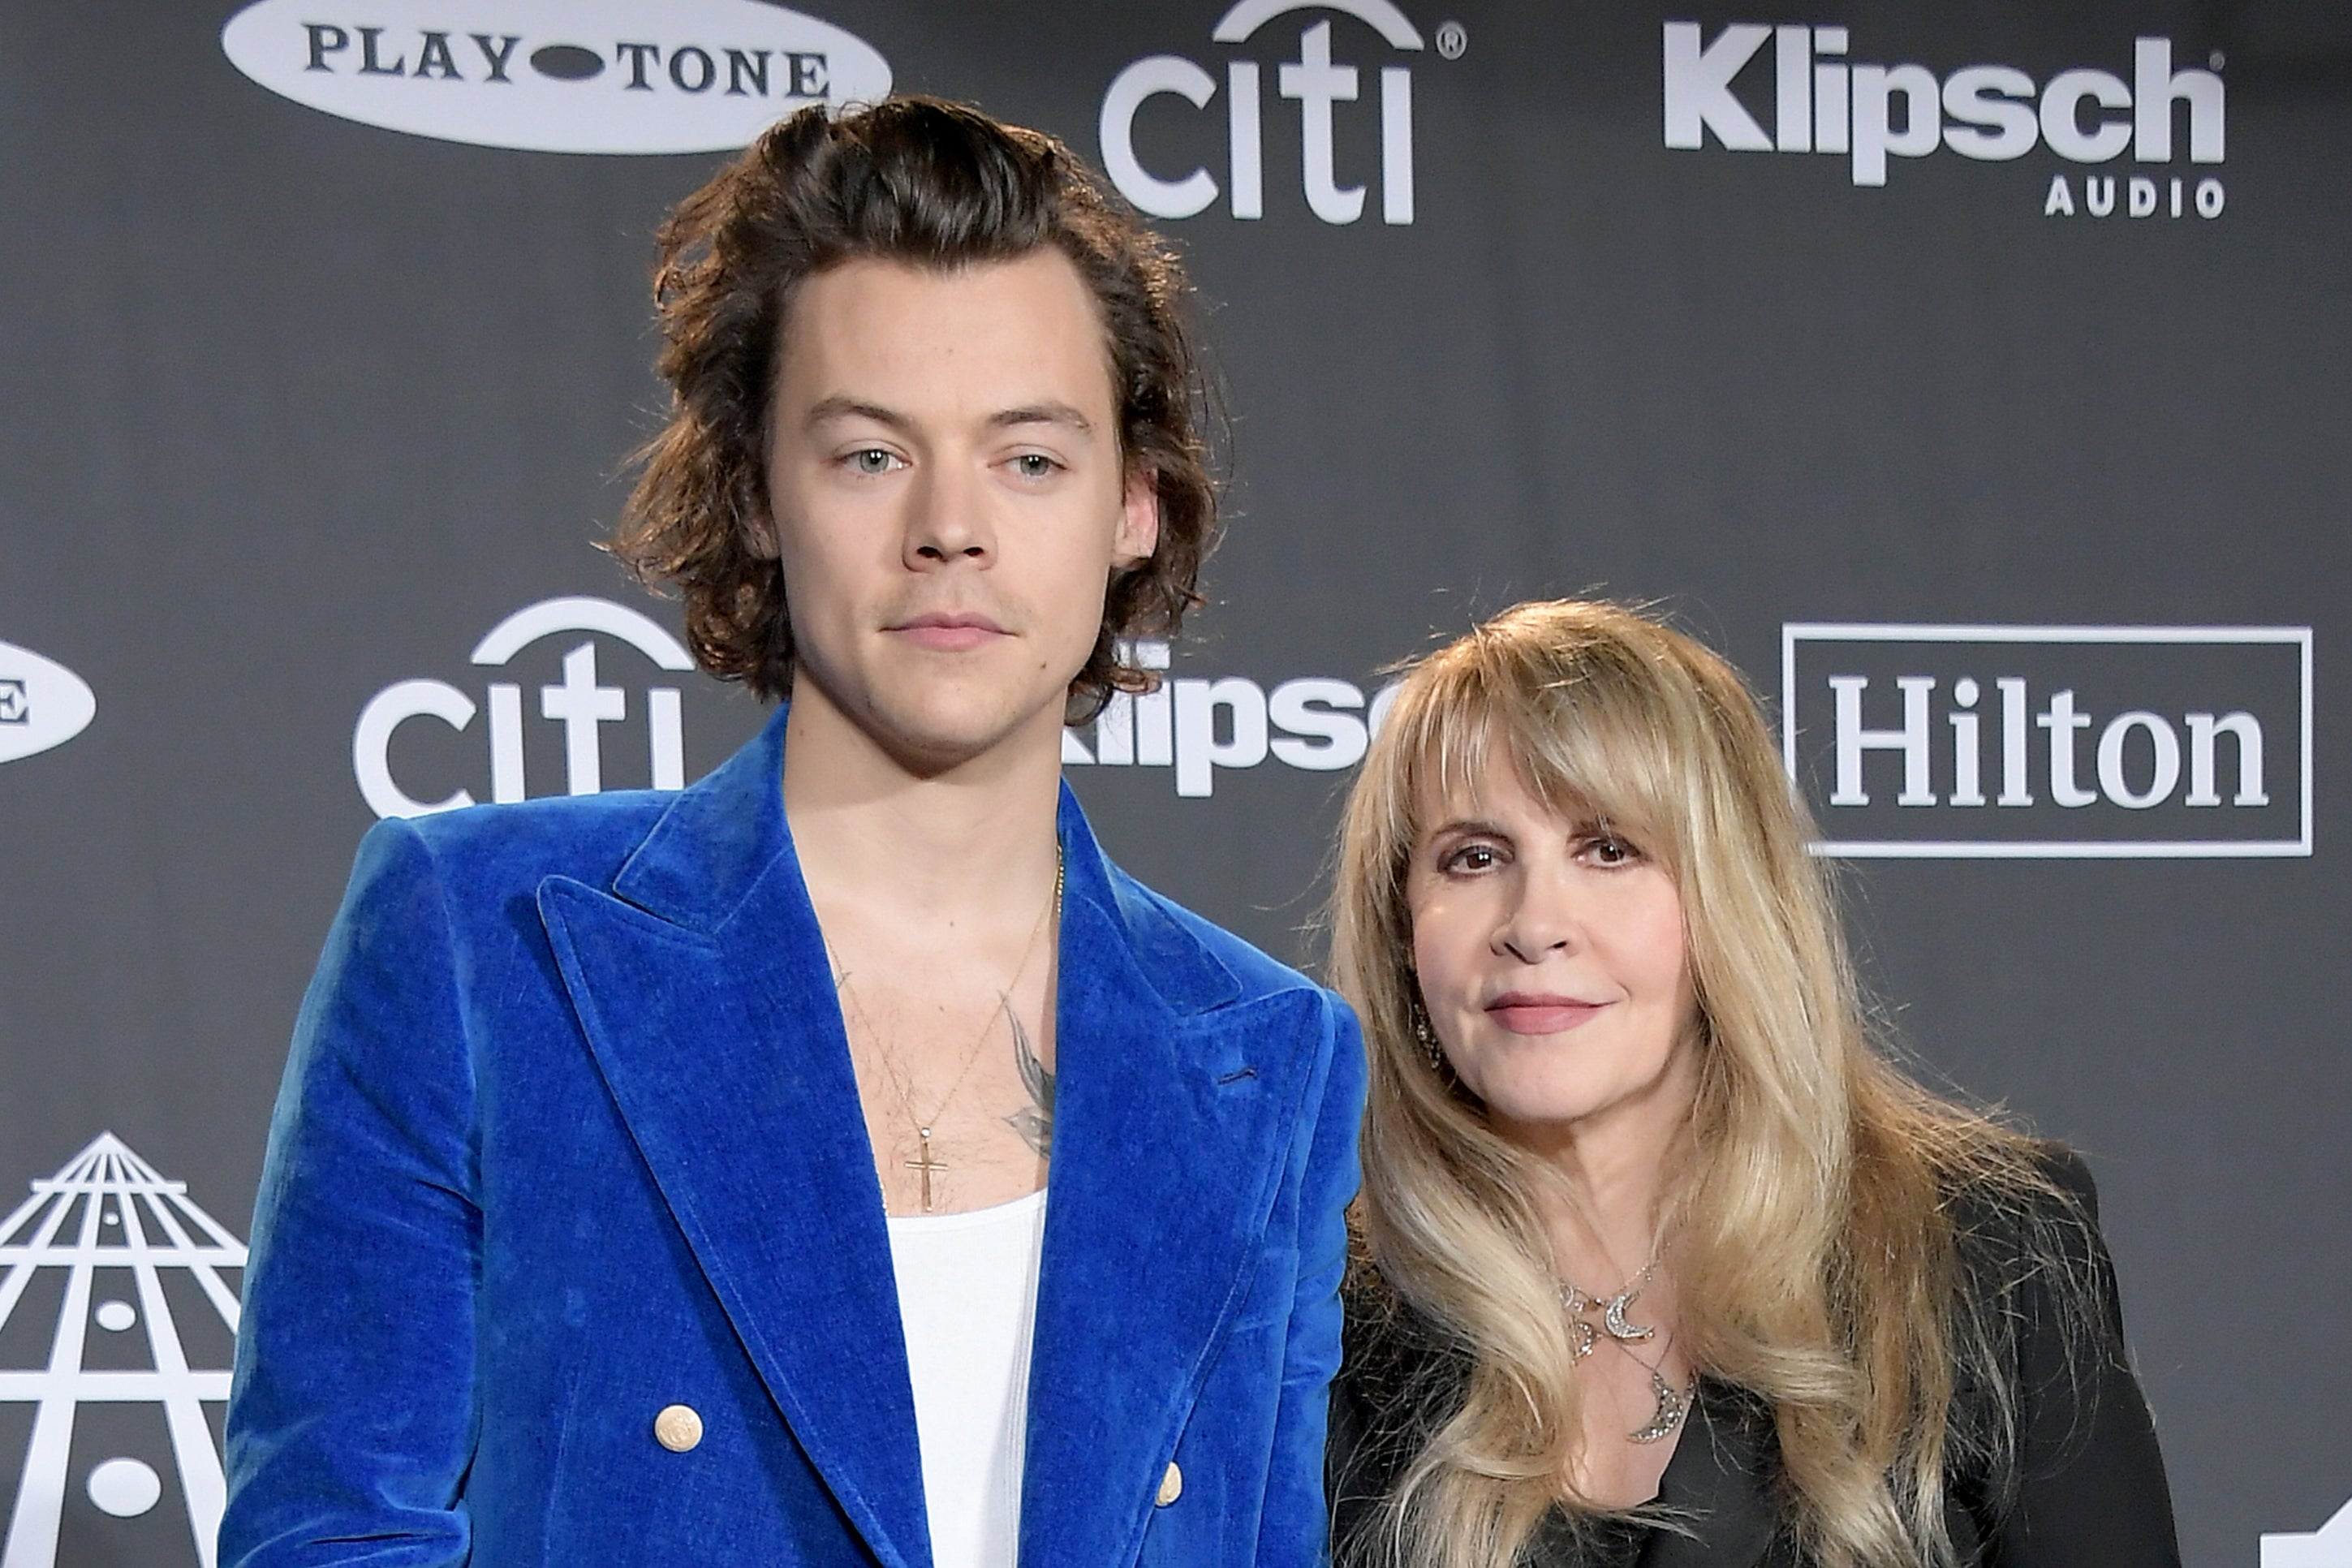 Harry Styles and Stevie Nicks at the 2019 Rock & Roll Hall Of Fame Induction Ceremony